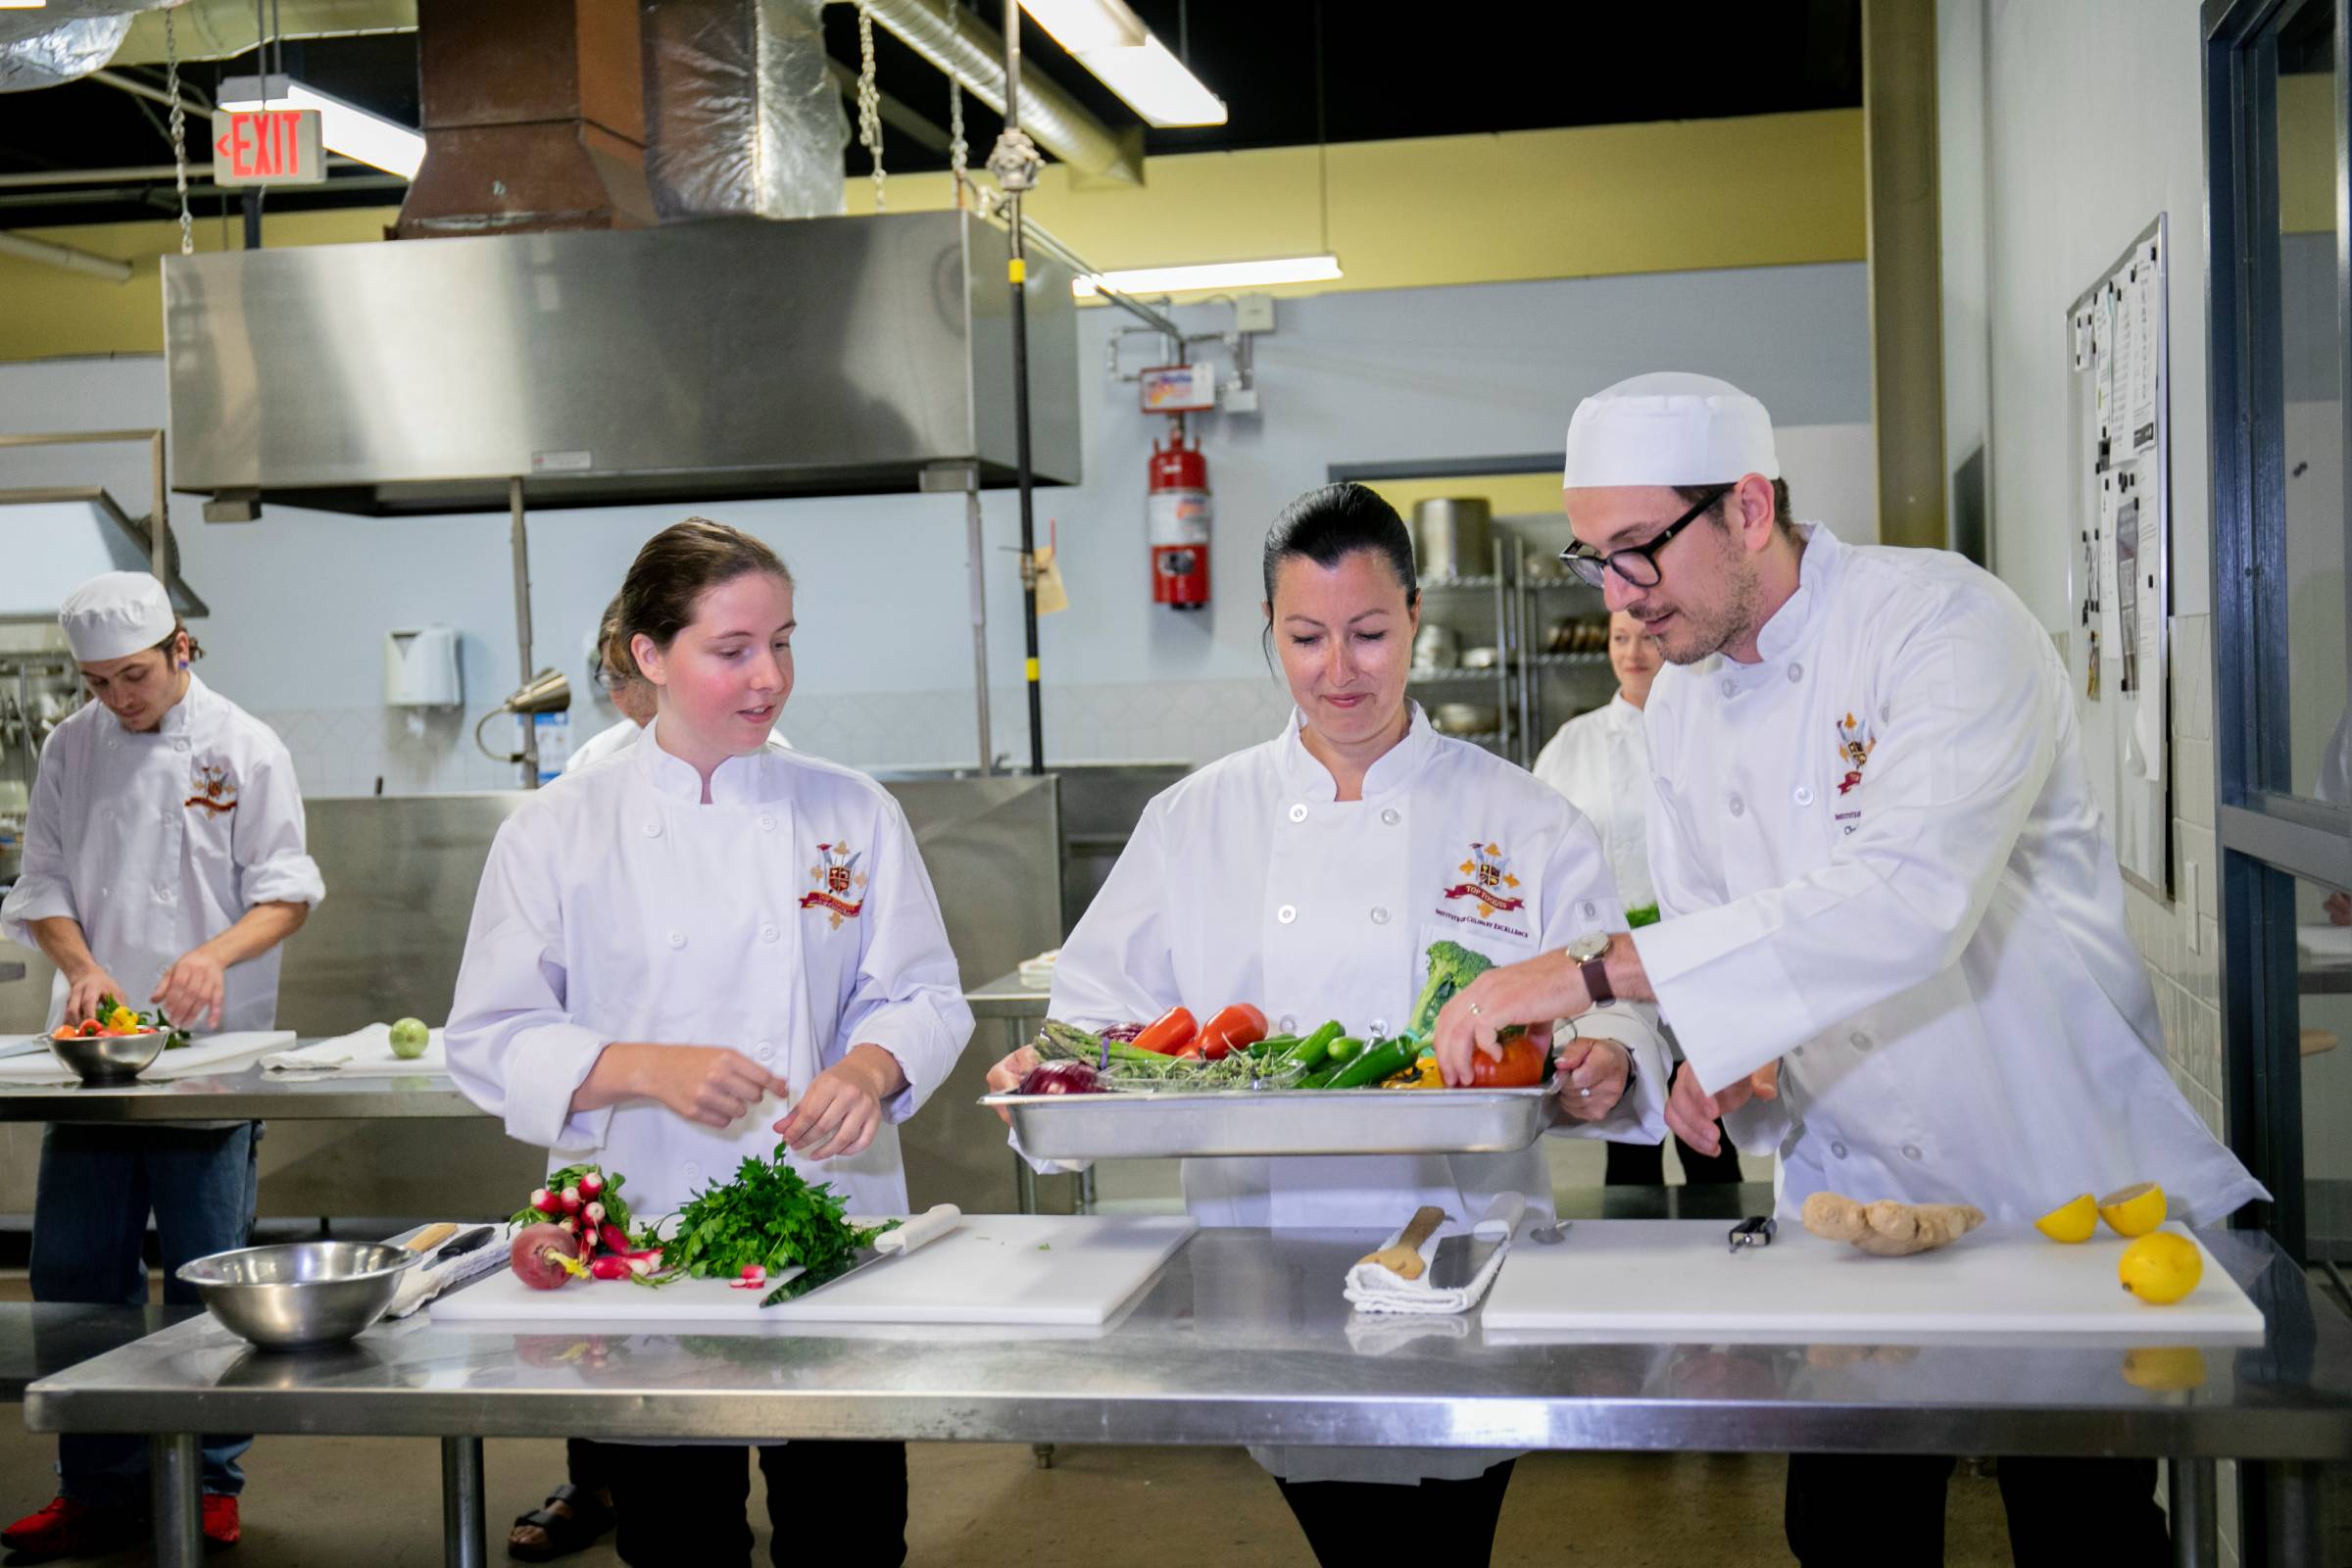 Comparing Culinary Colleges - Image 10 - Top Toques Institute of Culinary Excellence